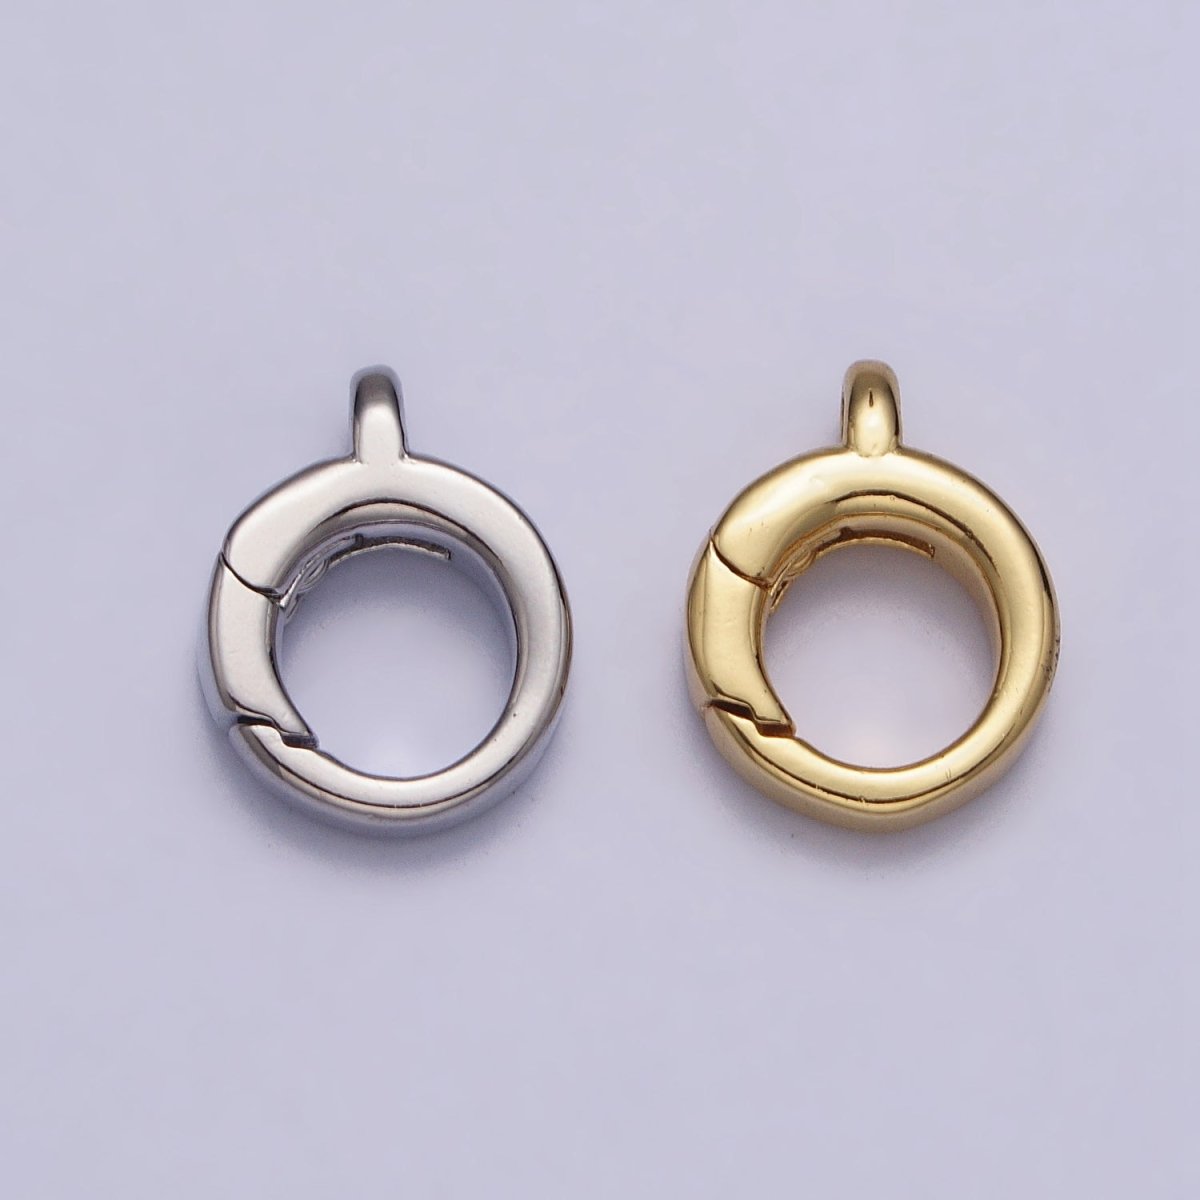 24K Gold Filled Round Push Triggerless Clasps Jewelry Closure Supply in Gold & Silver | Z-131 Z-132 - DLUXCA